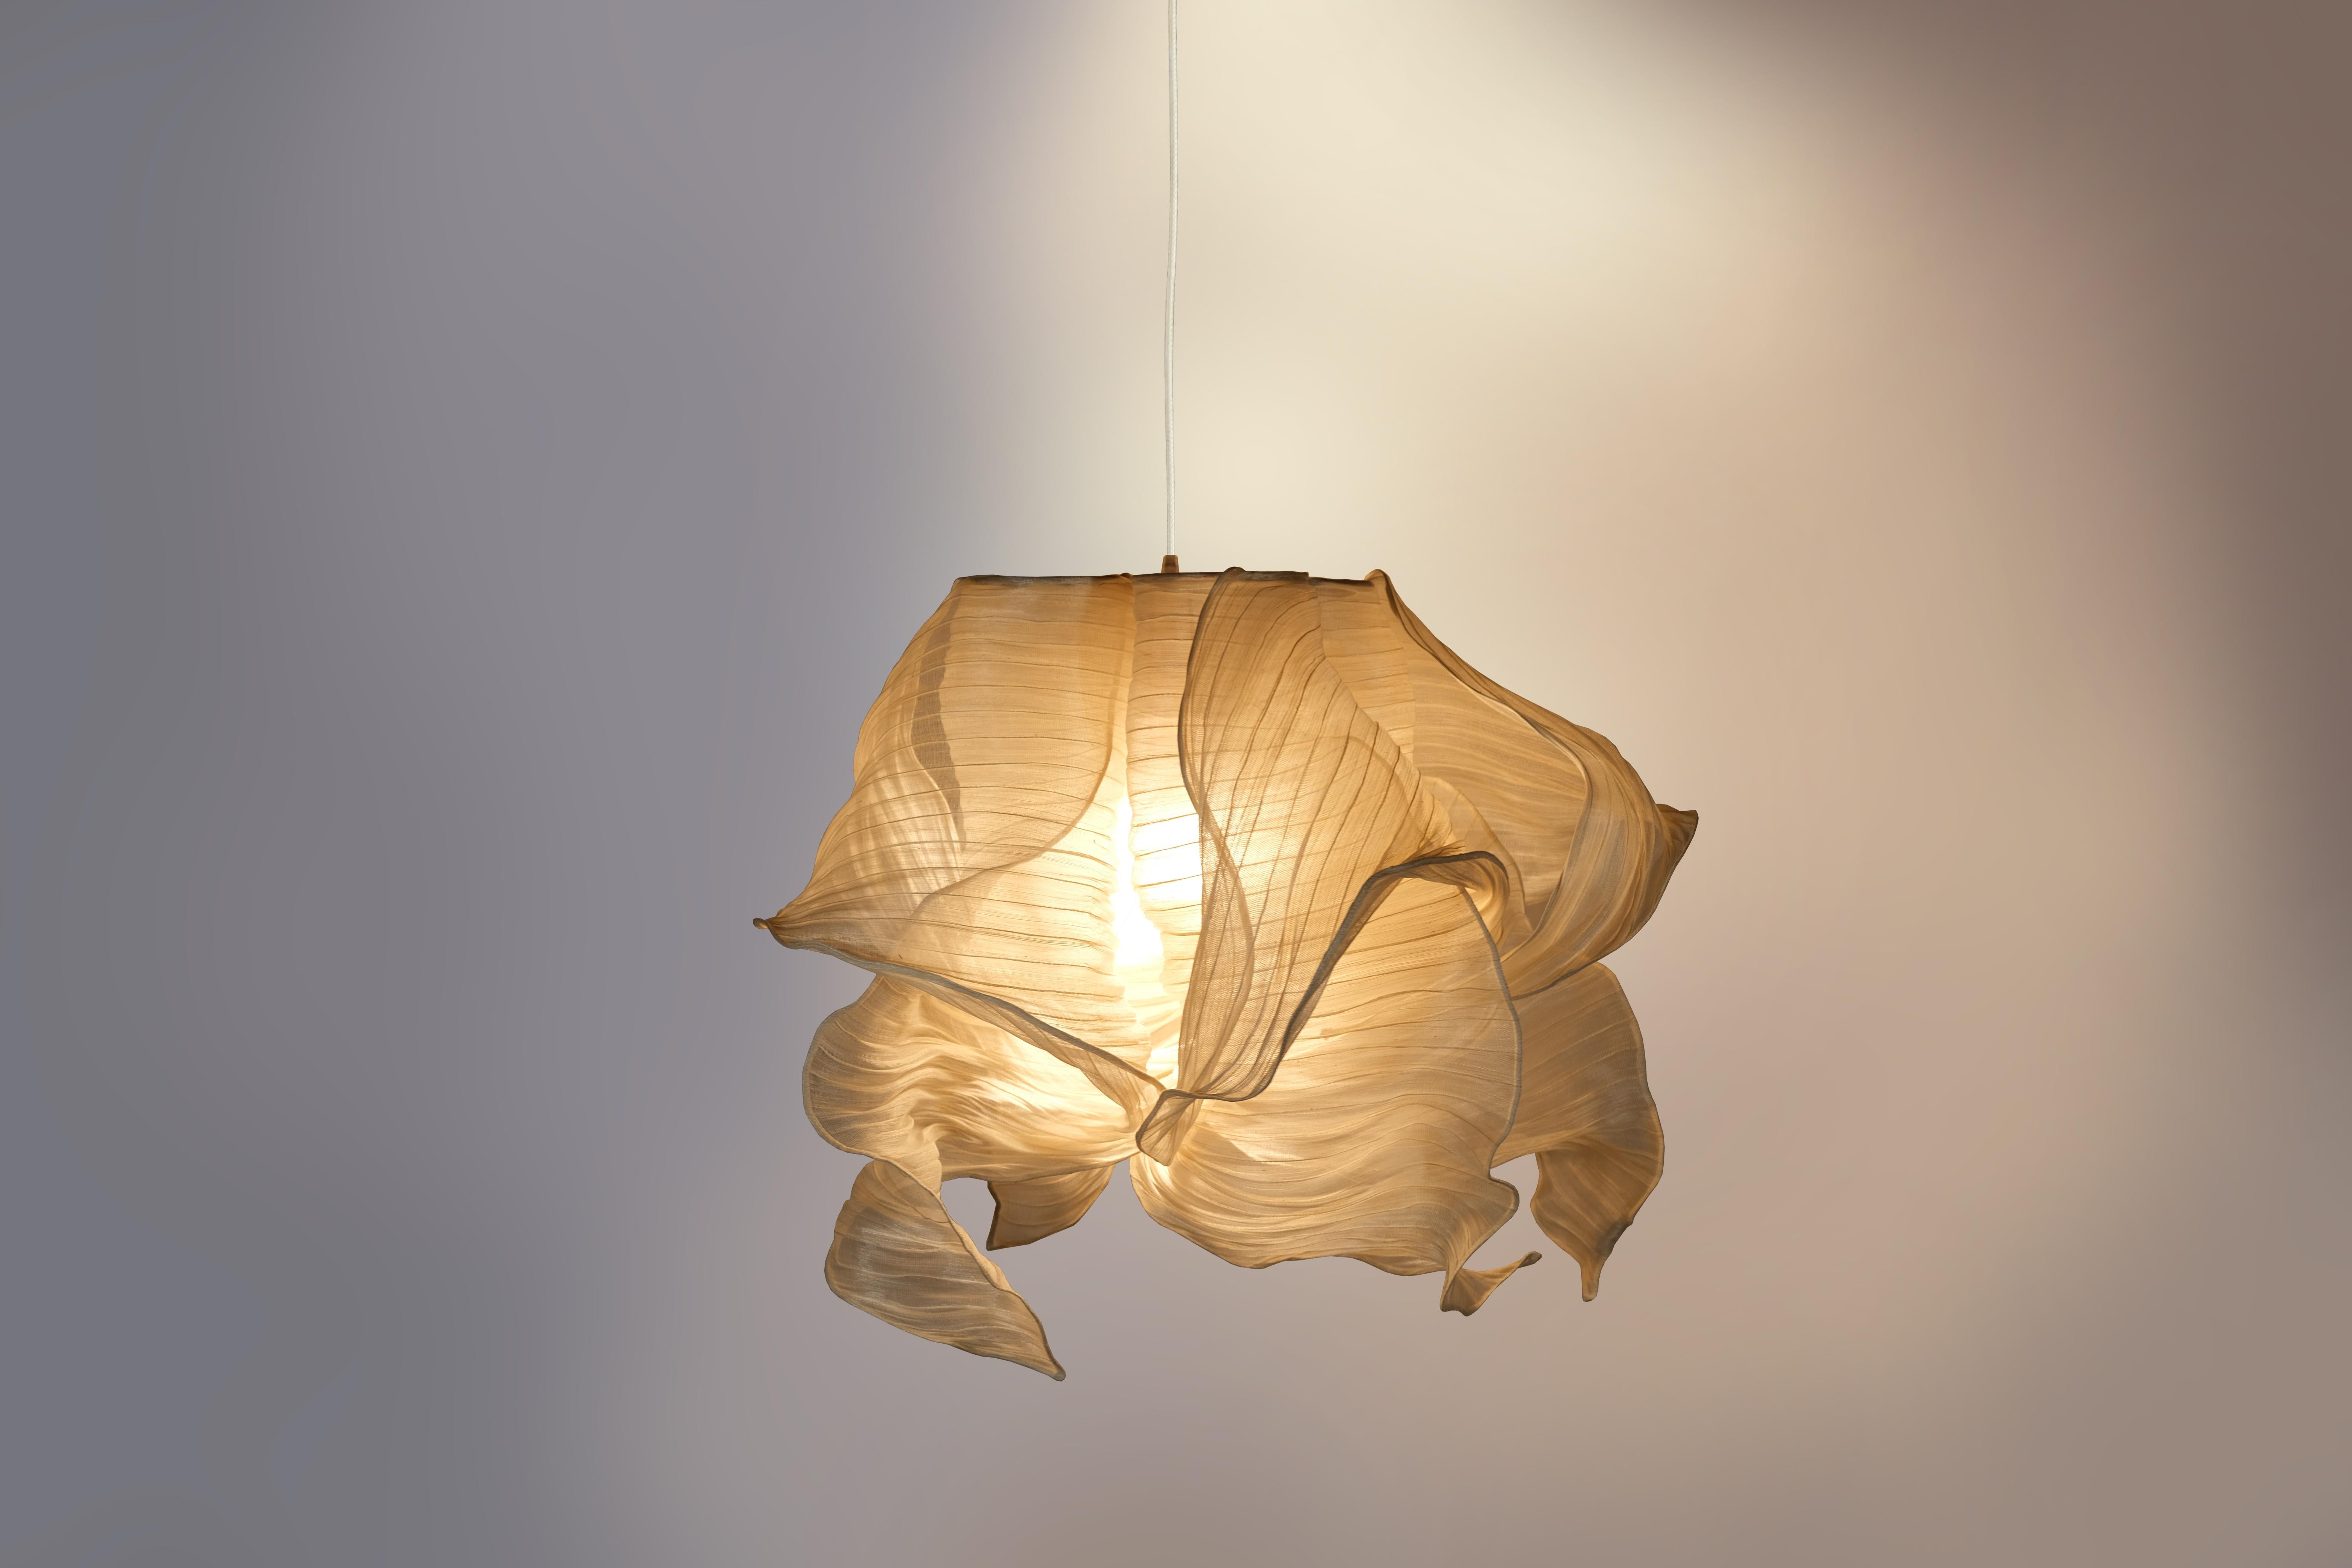 Cream Nebula pendant lamp by Mirei Monticelli
Dimensions: D 60 x W 60 x H 60 cm
Materials: Banaca fabric
Also available in hand-painted fabric.

Providing soft light in an organic and unique design, the Nebula Lamp draws its inspiration from